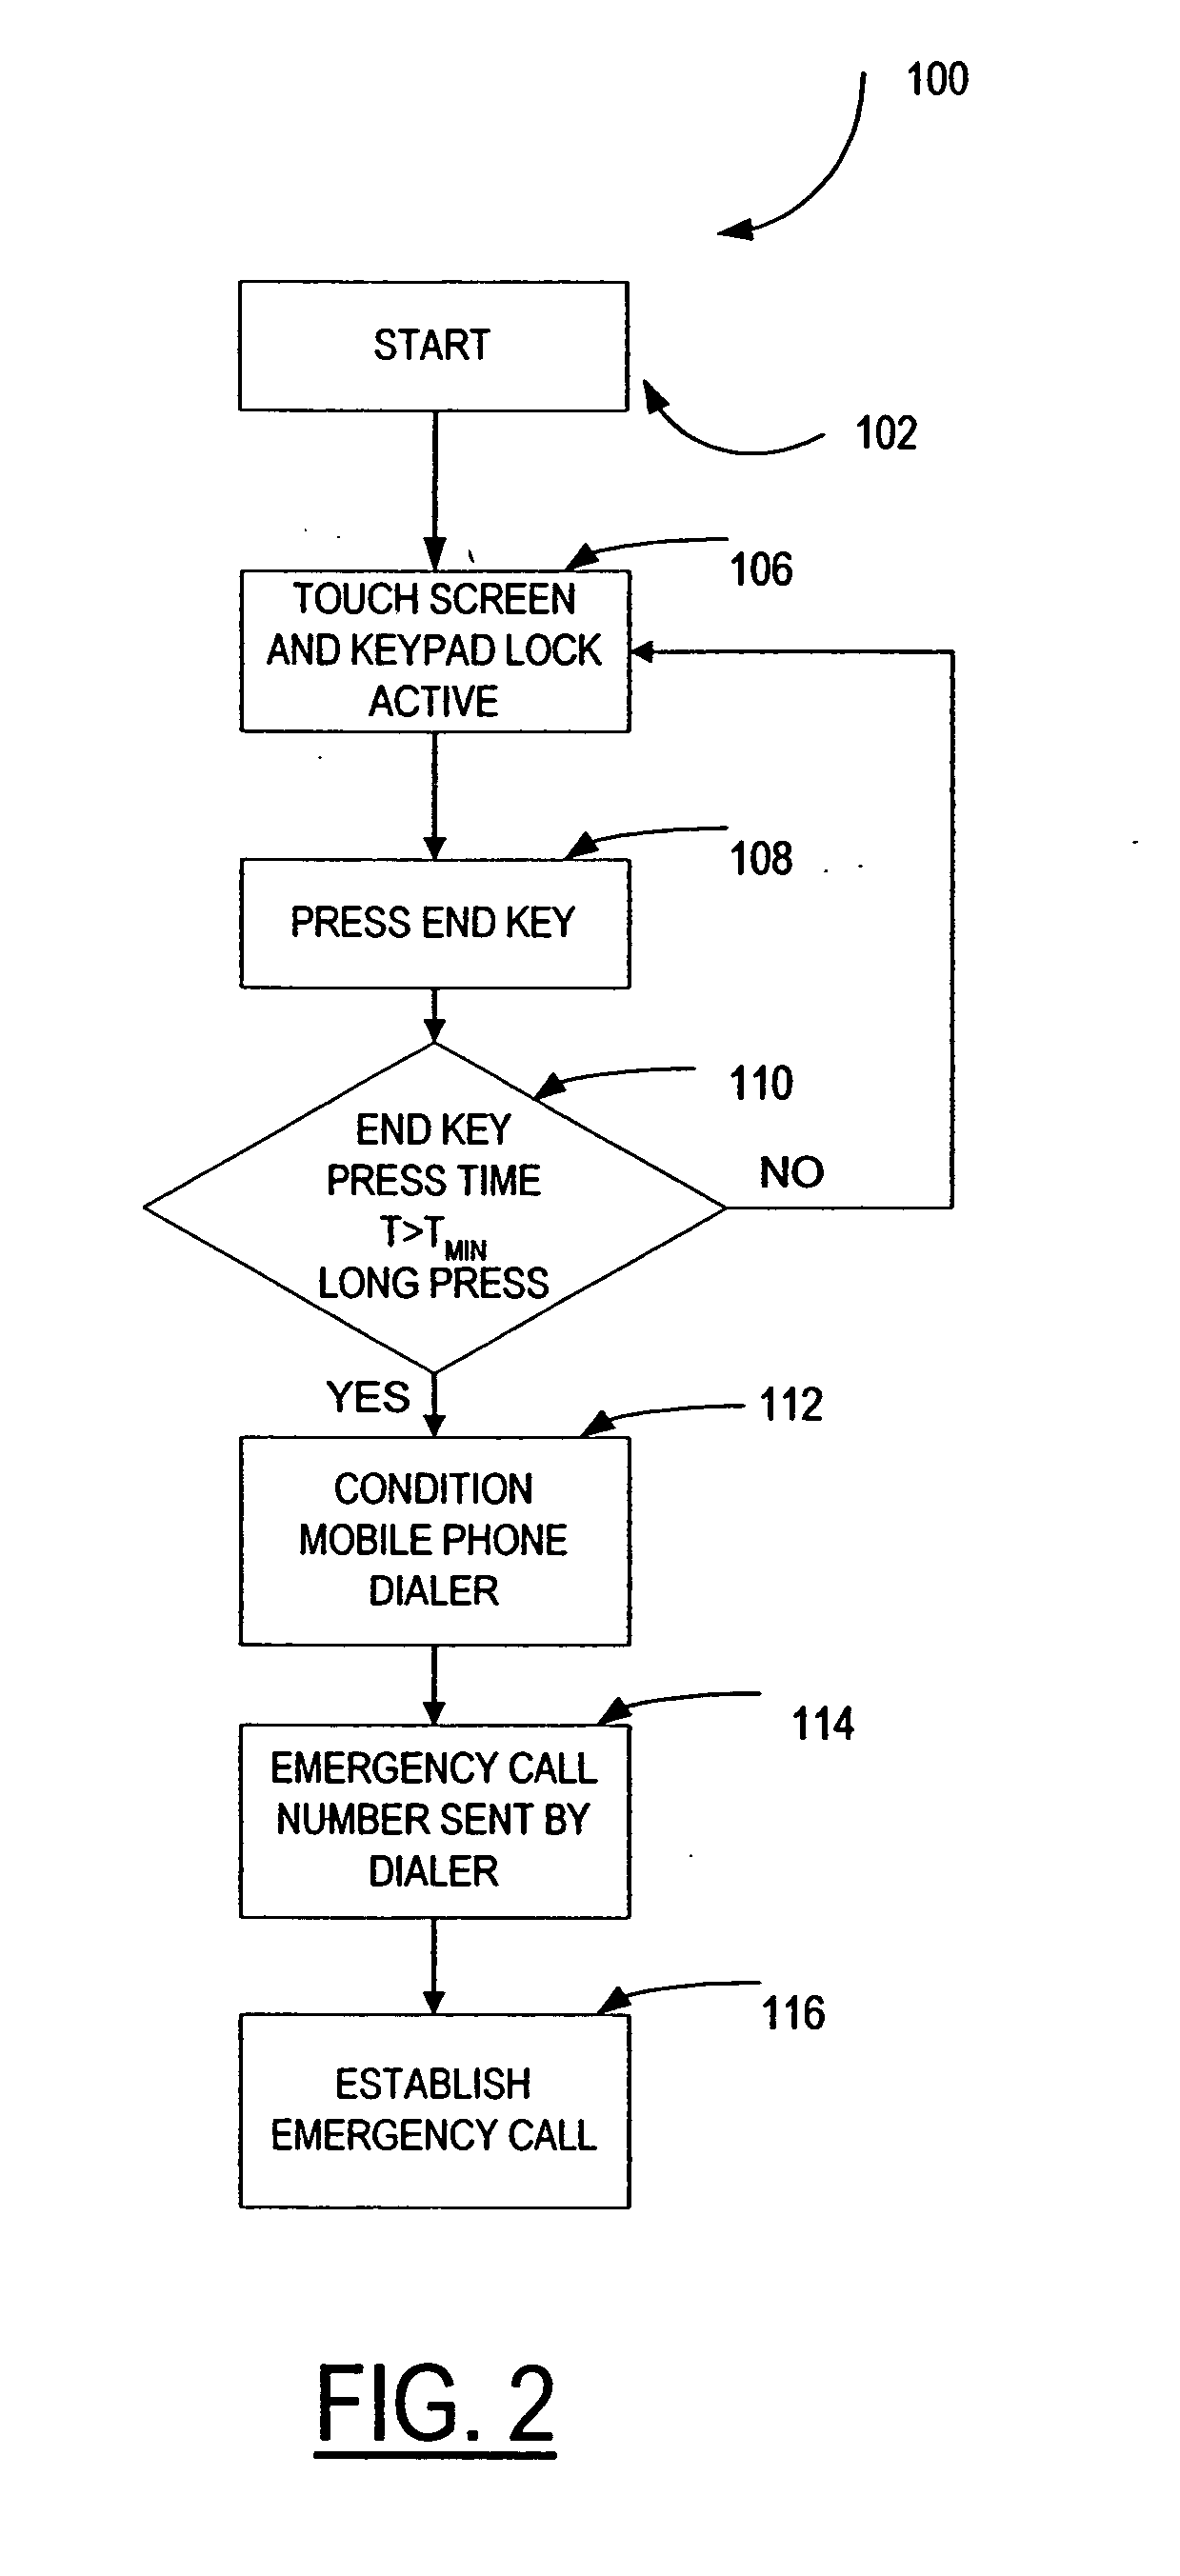 Method and related apparatus for emergency calling in a touch screen mobile phone from a touch screen and keypad lock active state